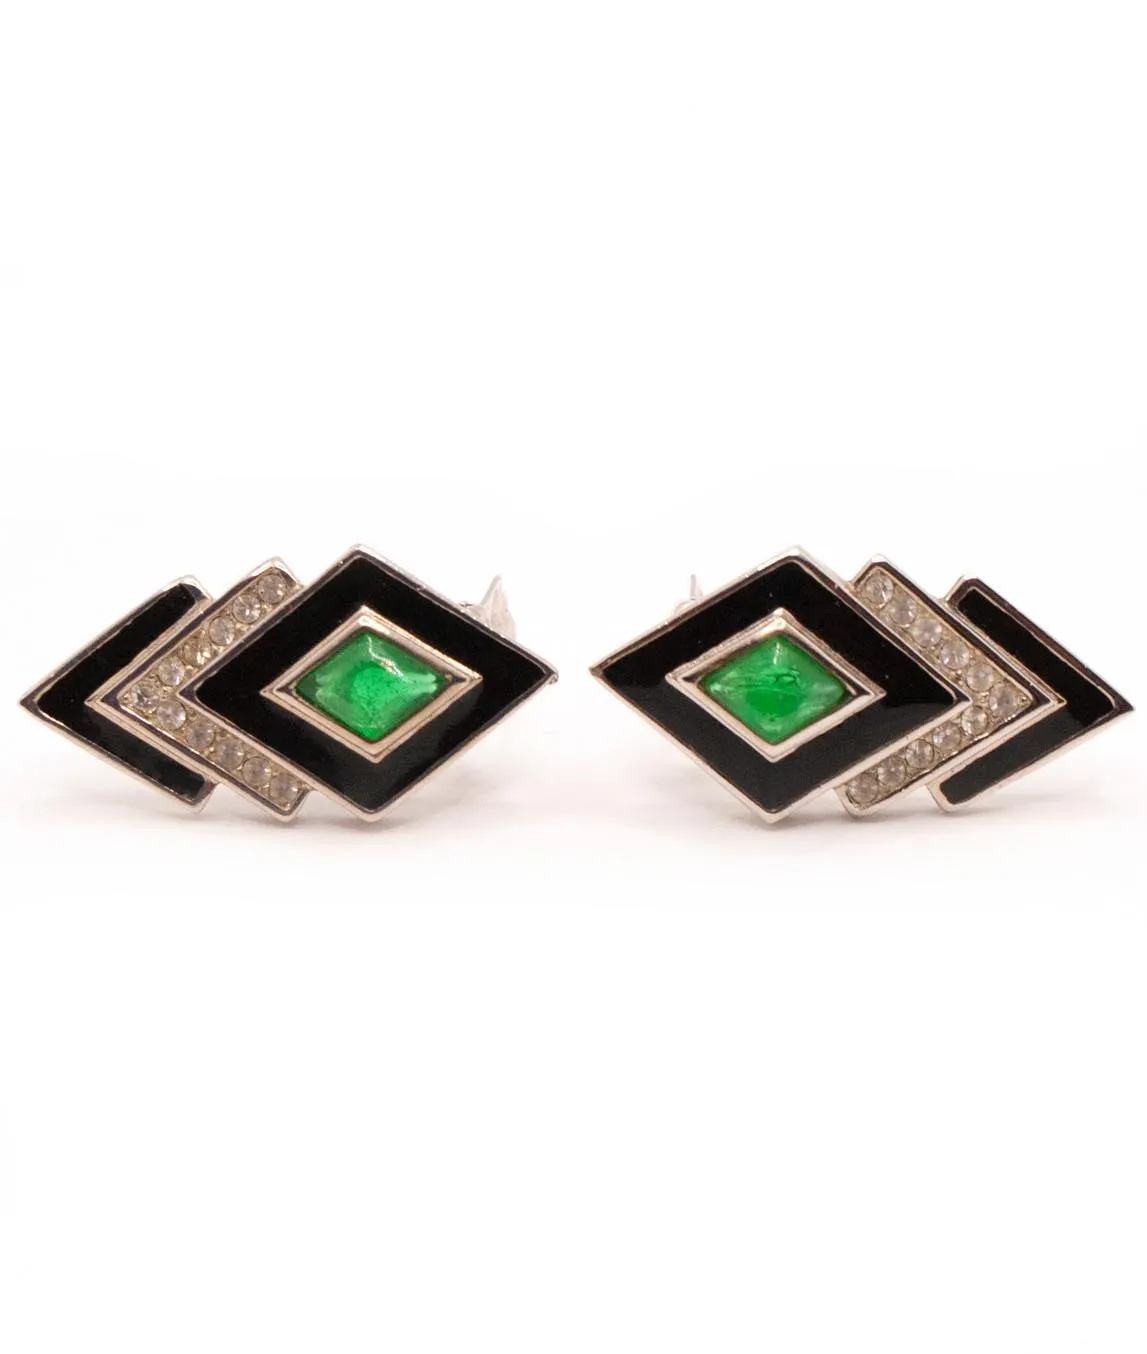 Black and green earrings in an art deco style with rhinestones by Christian Dior on their side